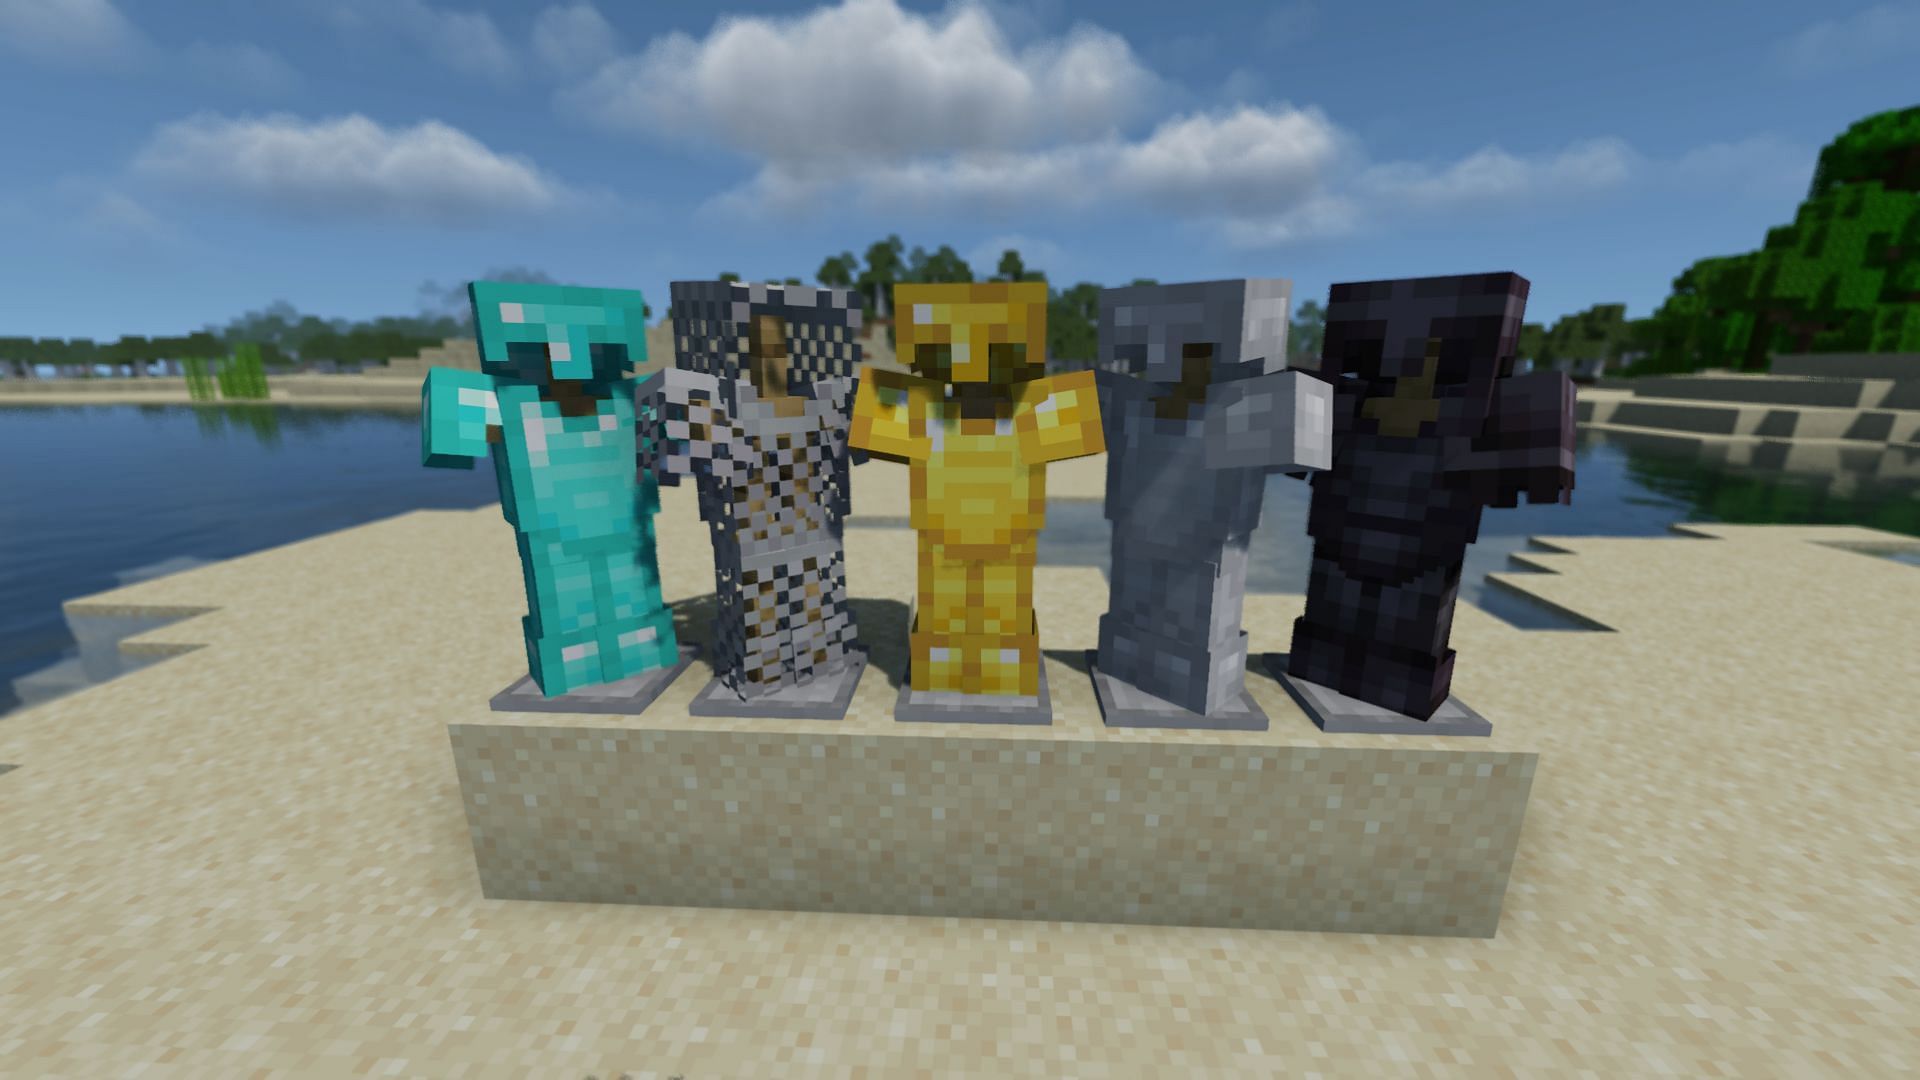 The best armor&#039;s in the game (Image via Minecraft)